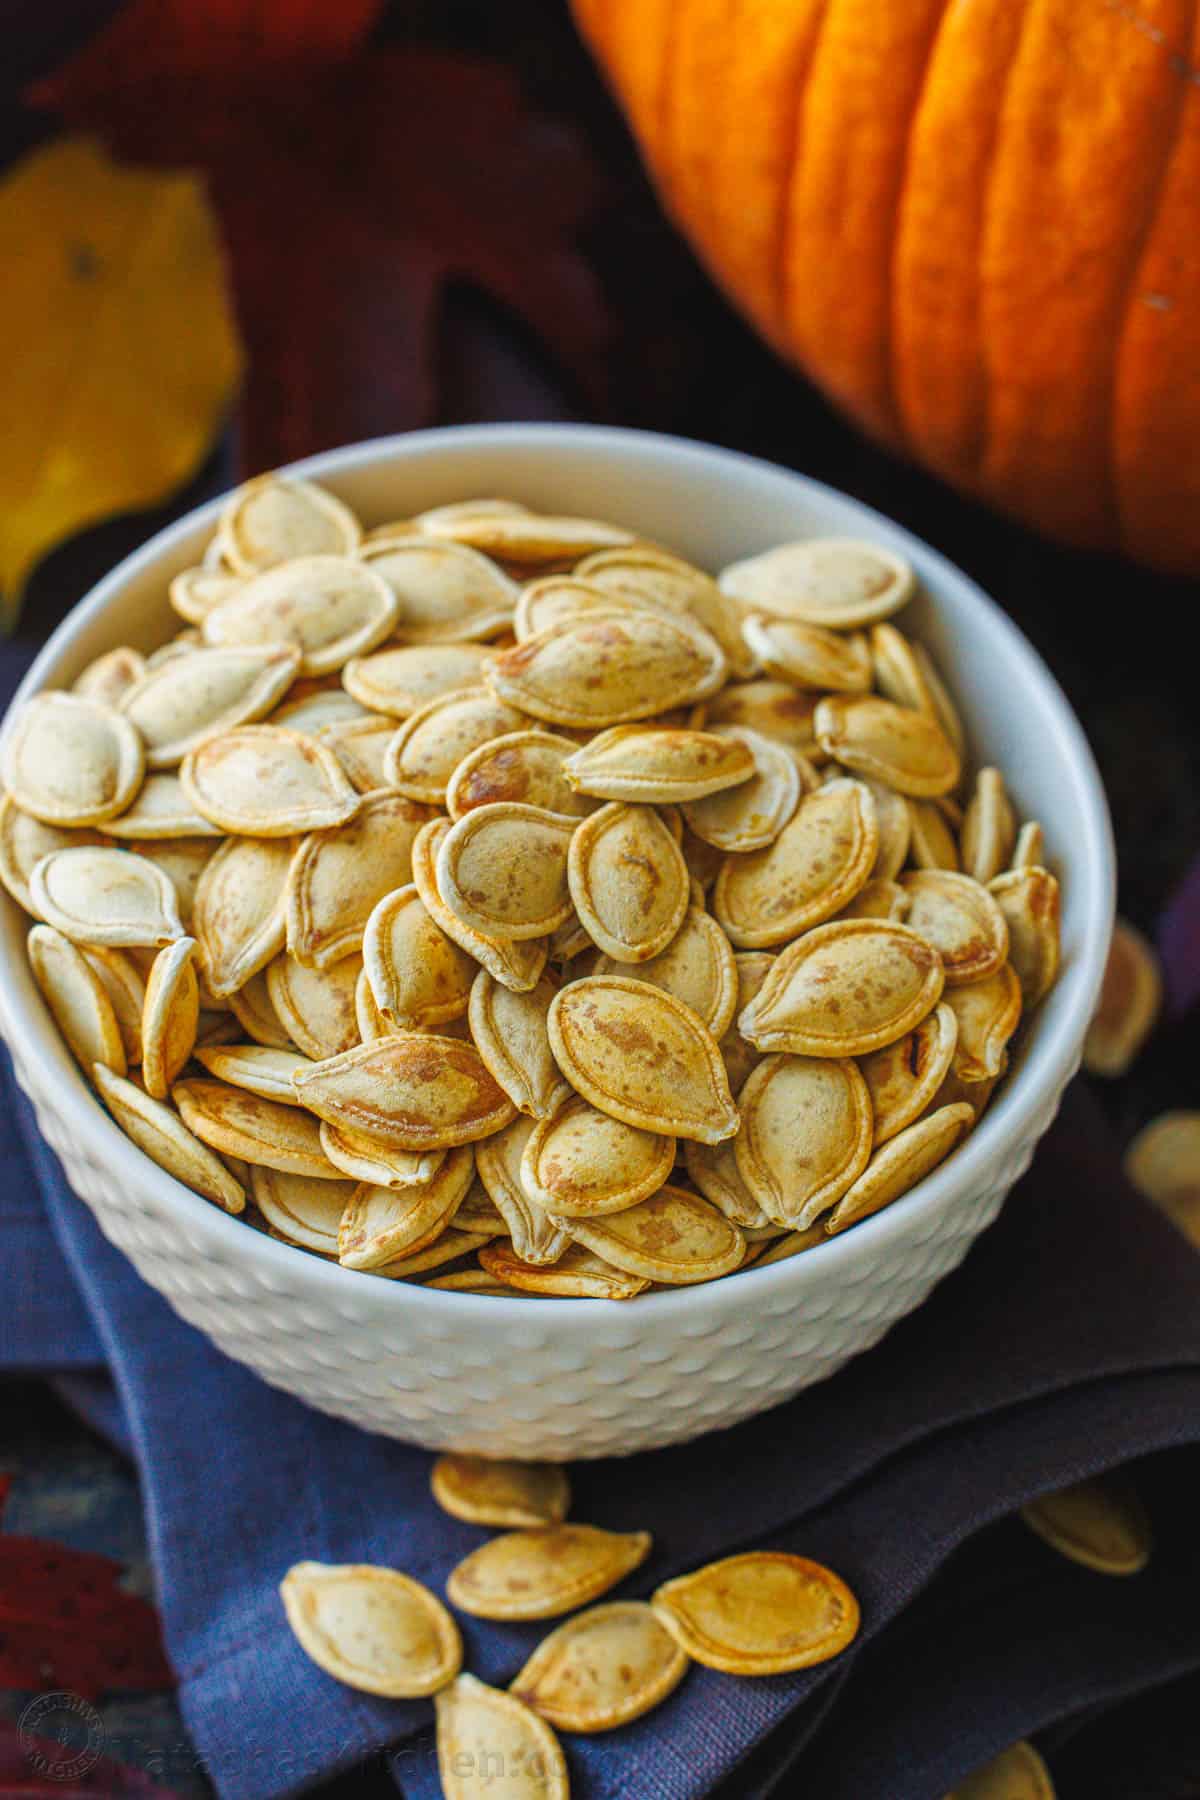 Pumpkin seeds roasted and seasoned in a white bowl